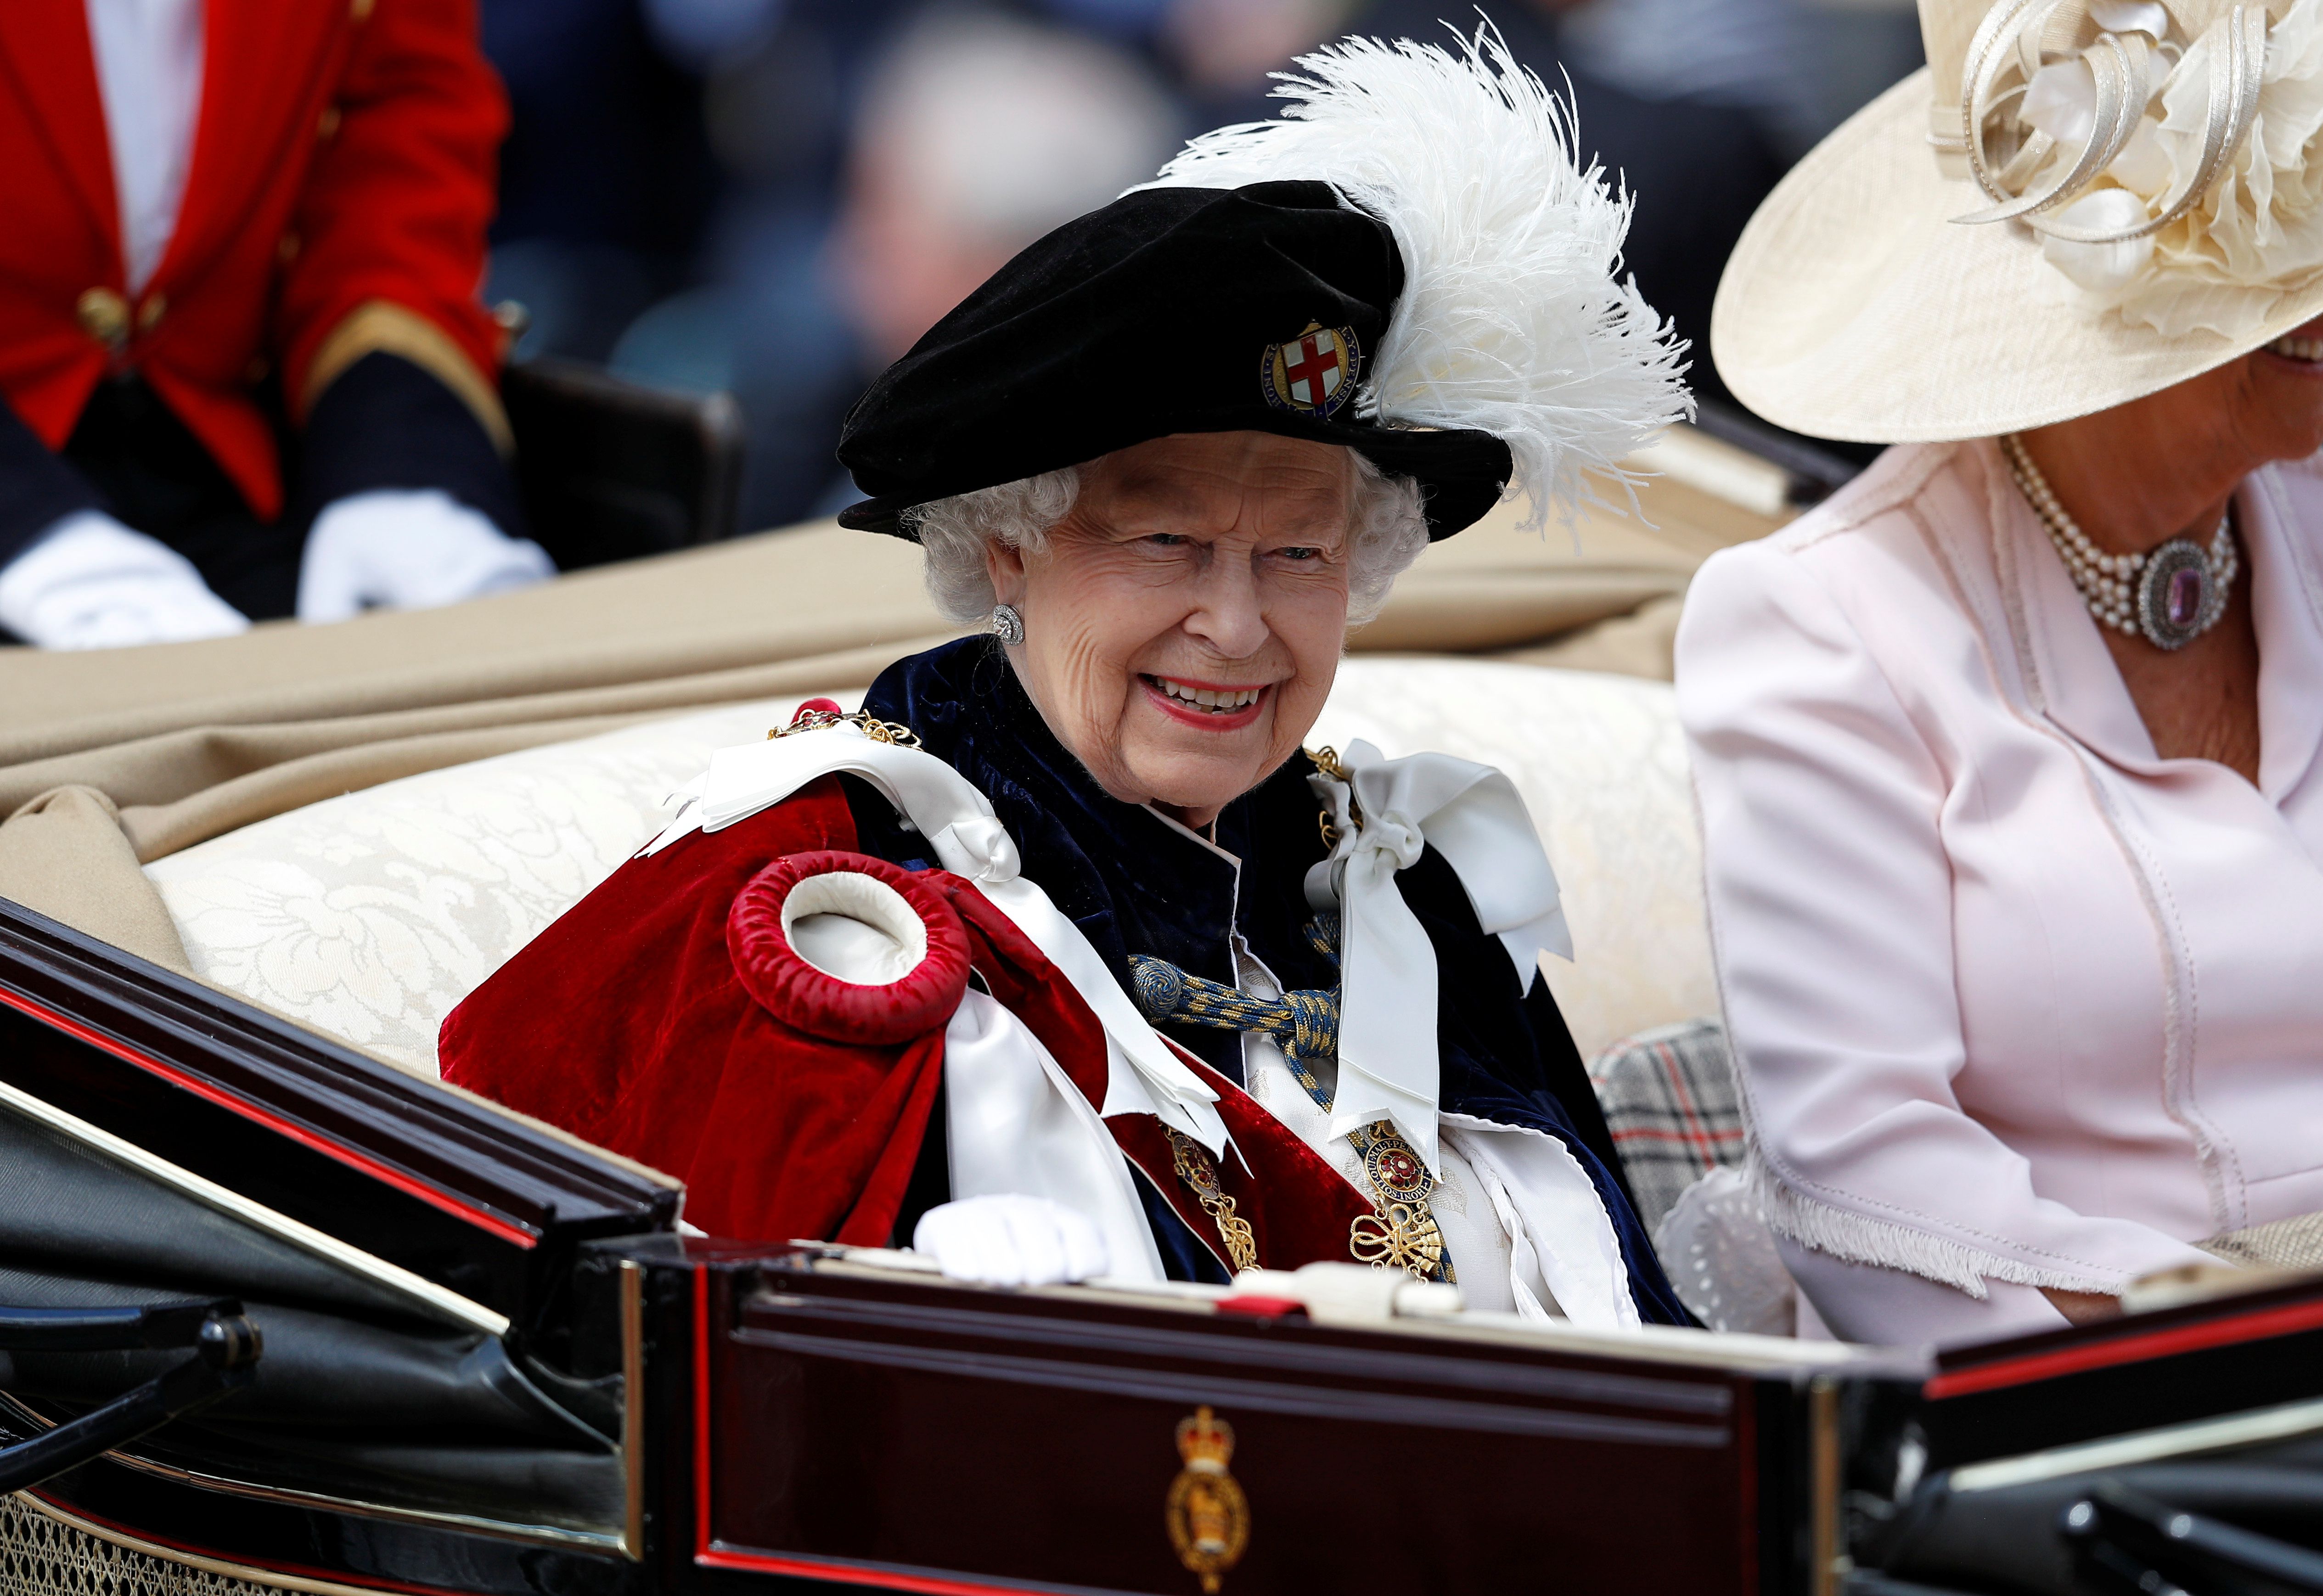 Order of the Garter: Queen leads ceremony honouring those who have excelled  in public service - Mirror Online